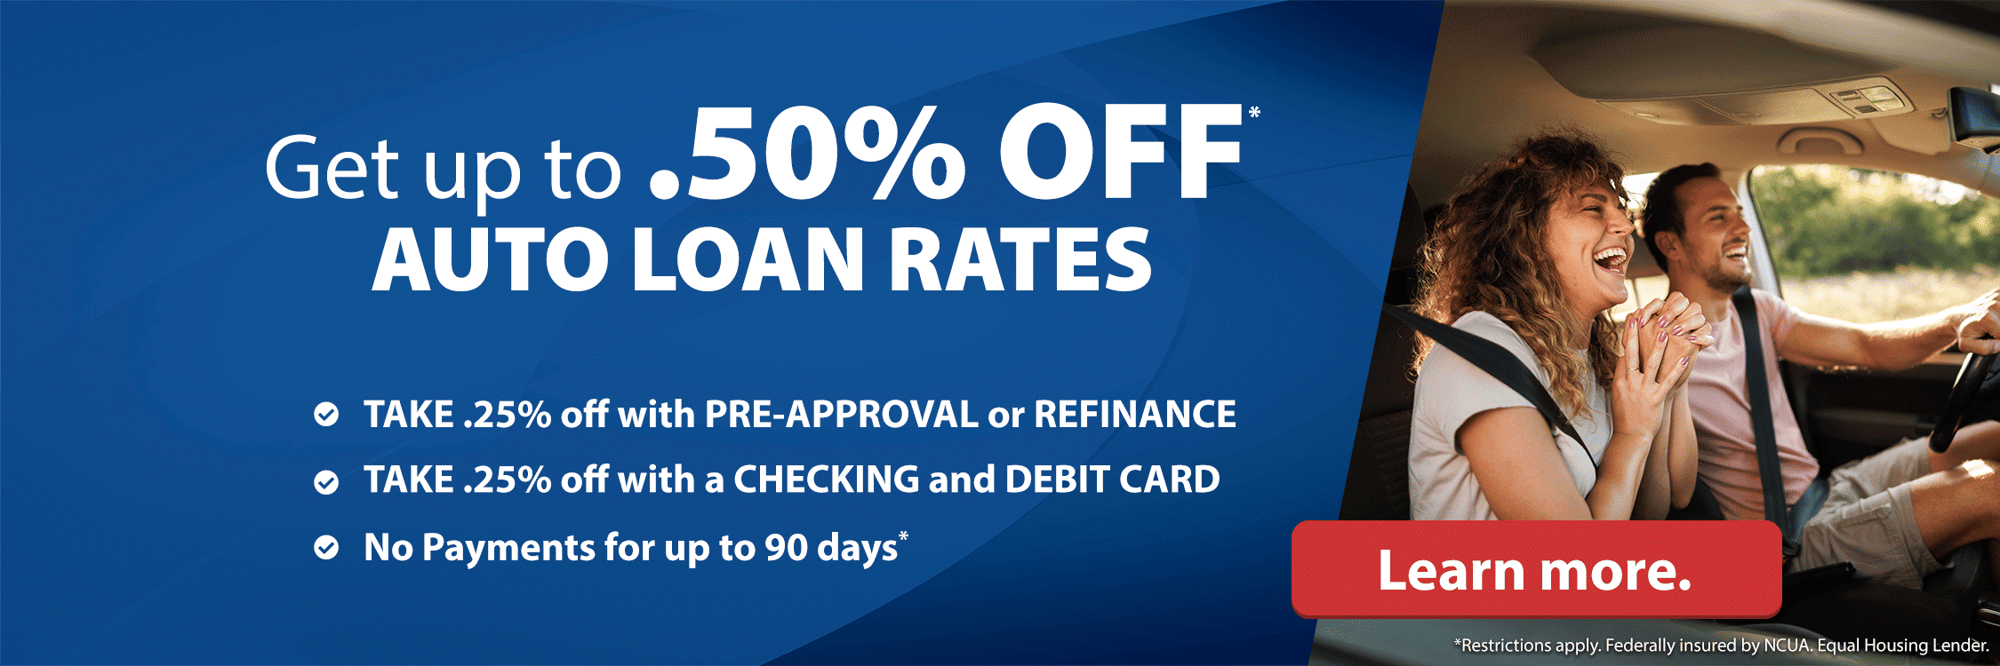 Get up to .50% off* Auto Loan Rates. Click here to learn more.